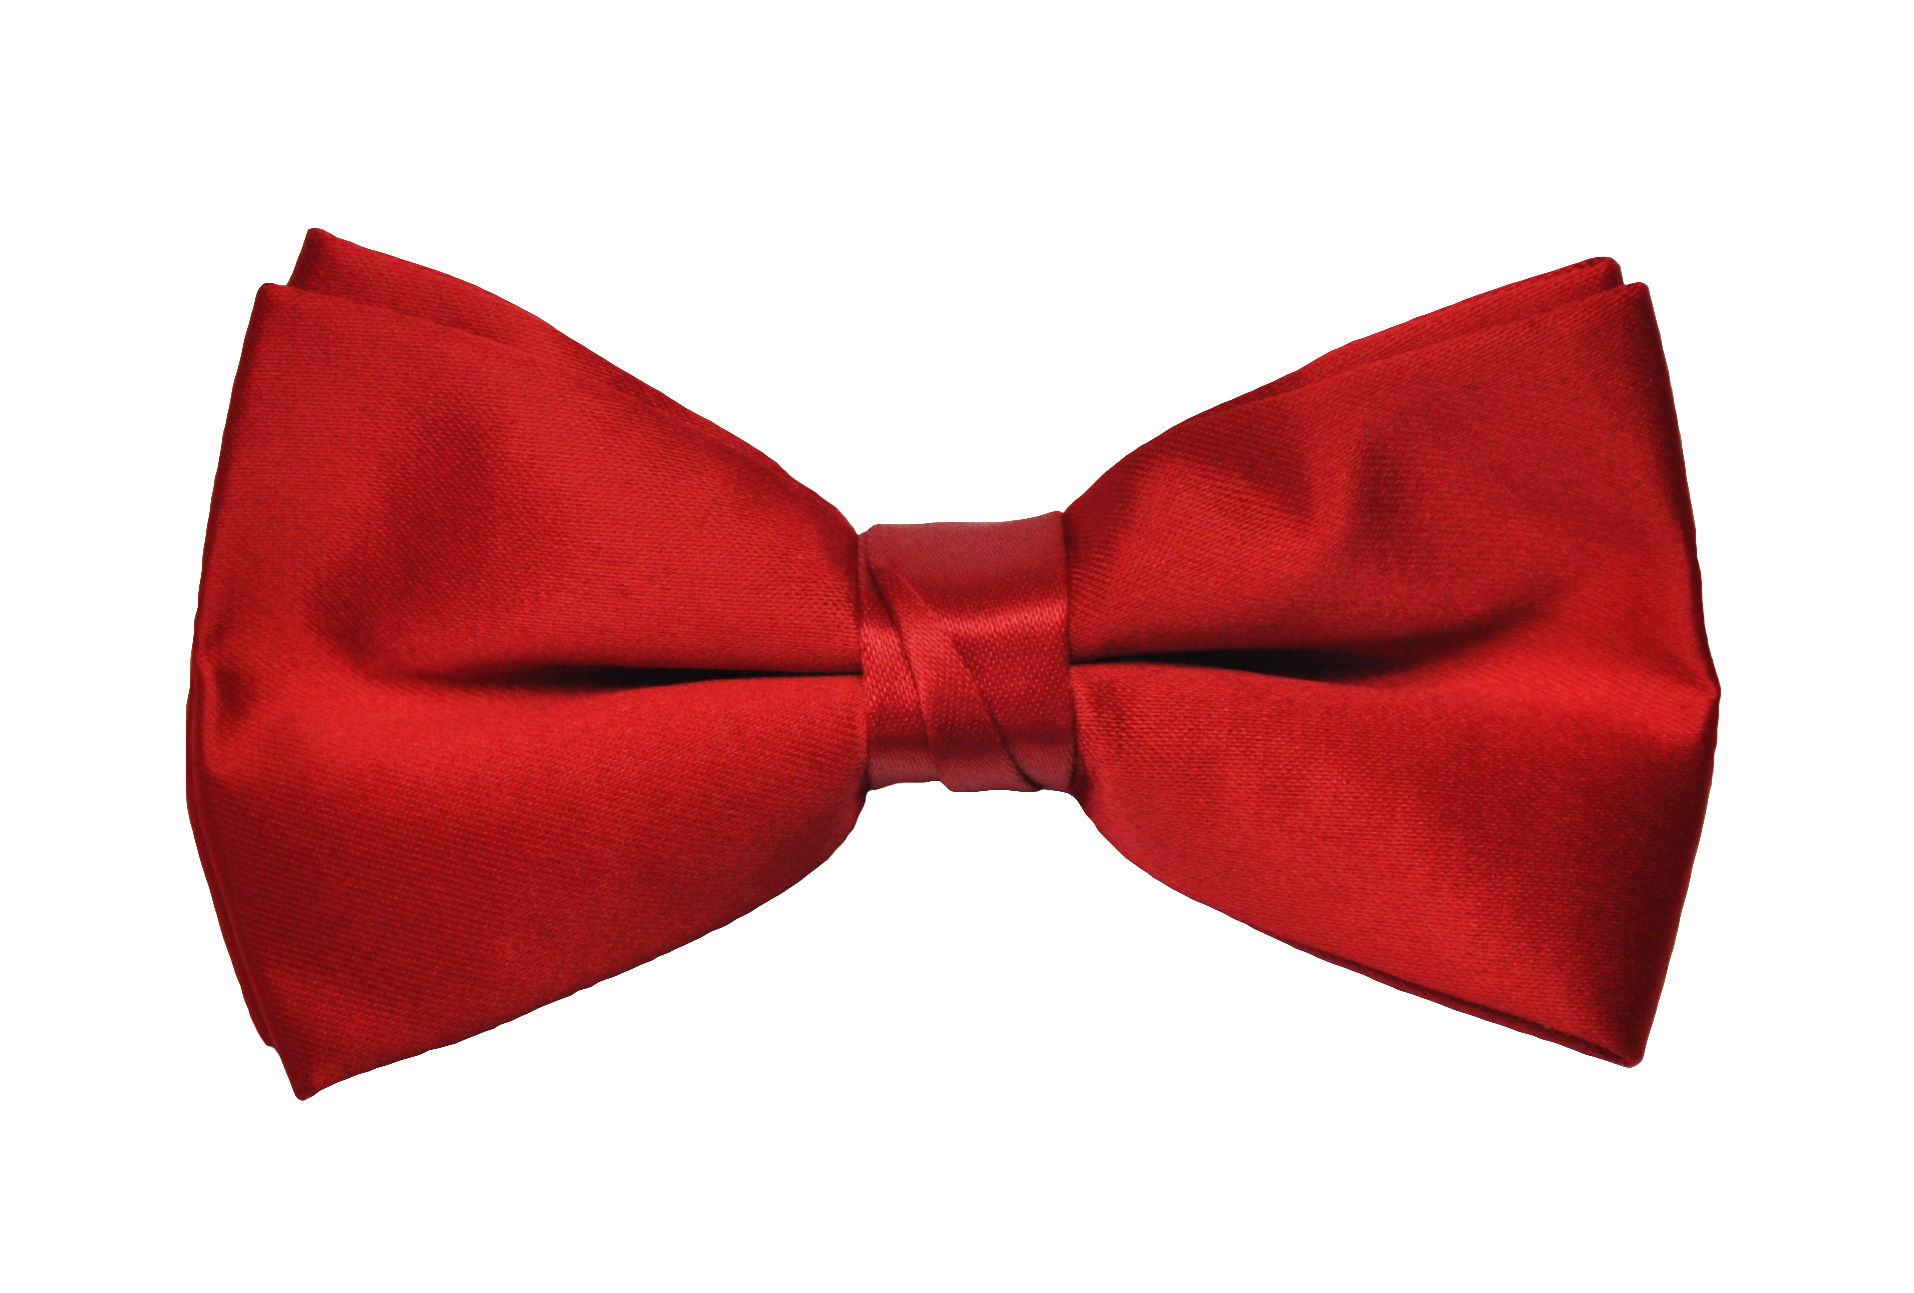 red tie clipart - photo #21